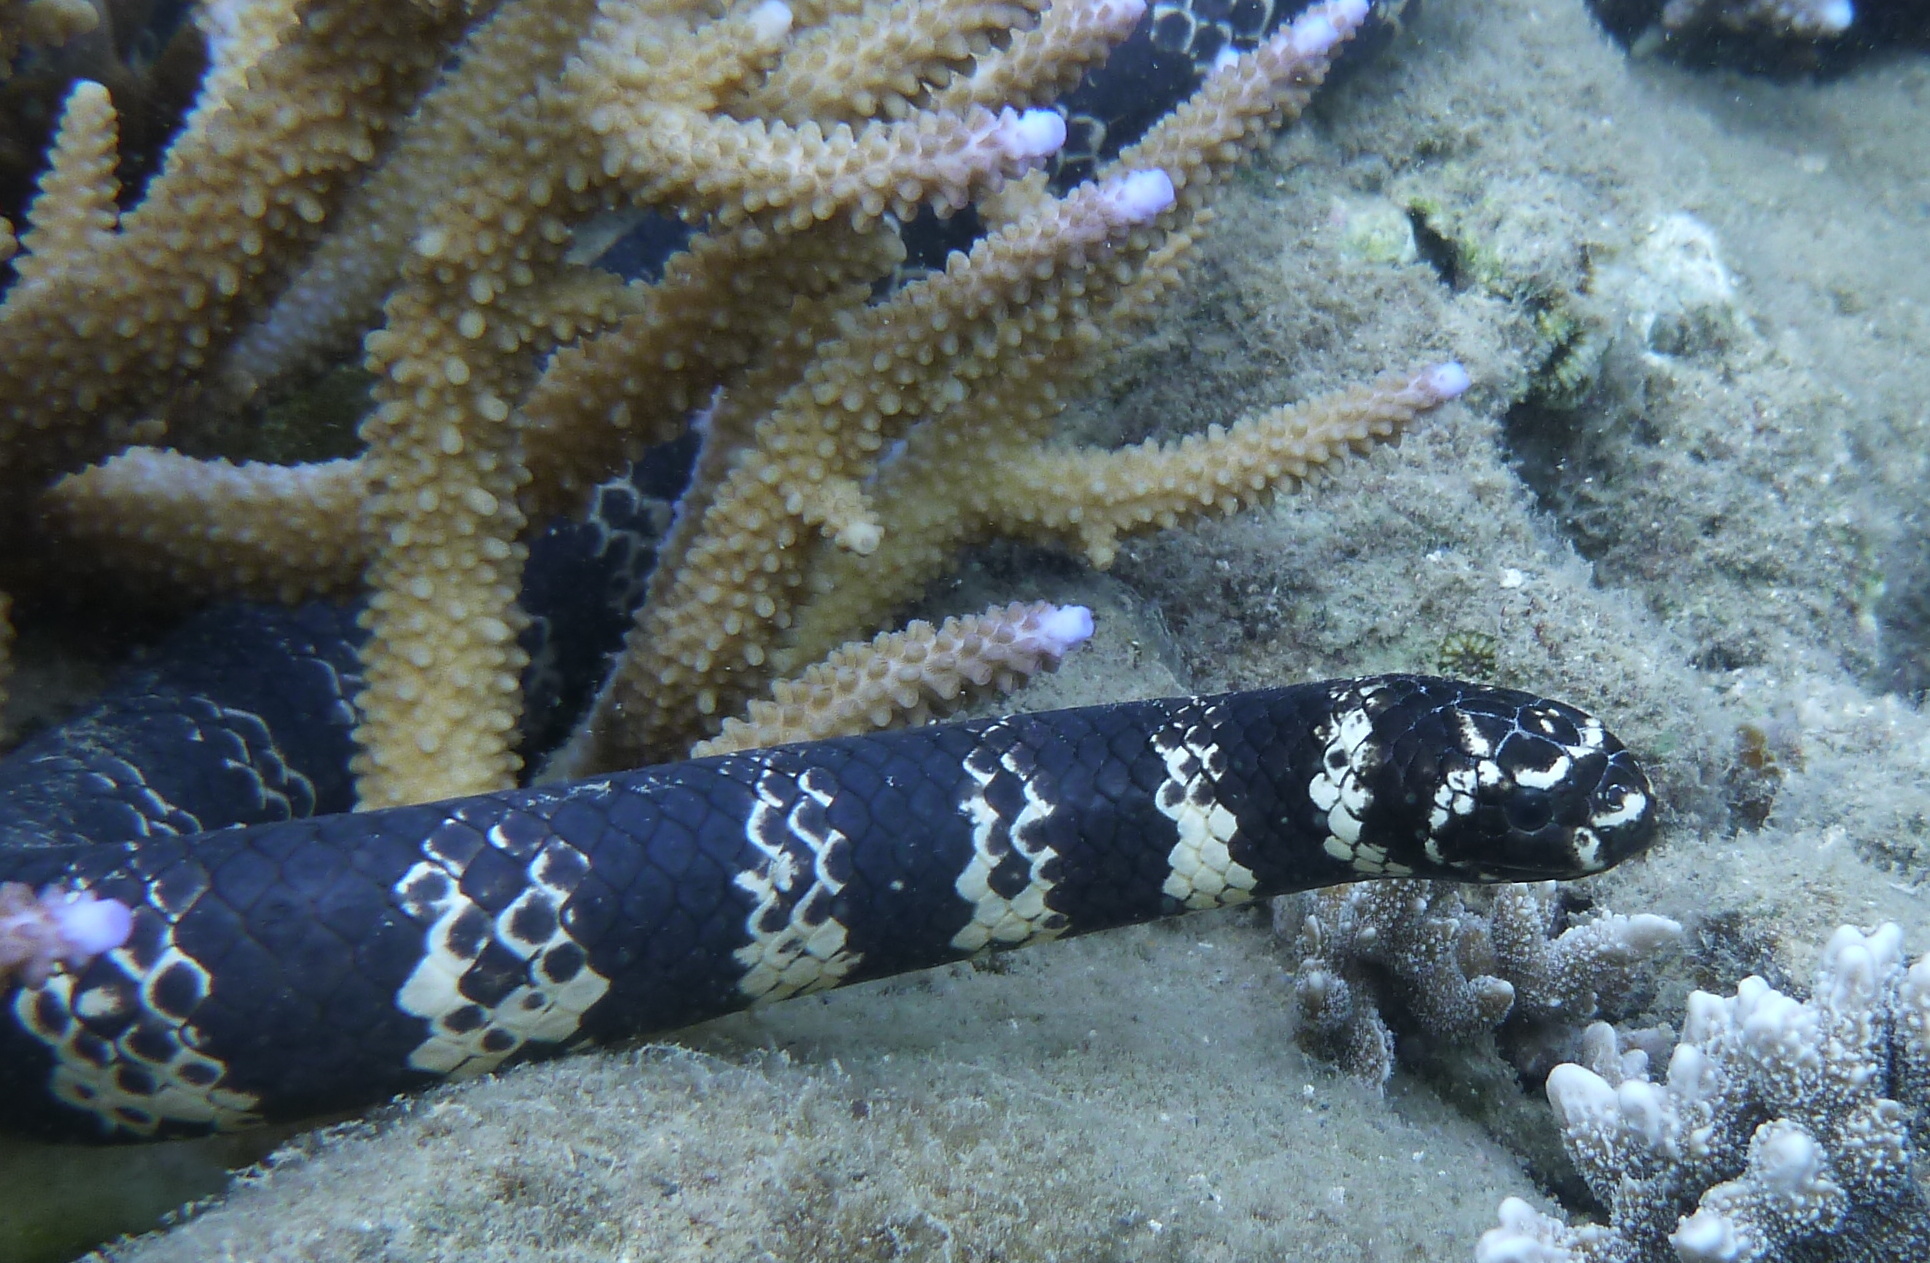 A Wild Explanation For Why These Sea Snakes Are Losing Their Stripes